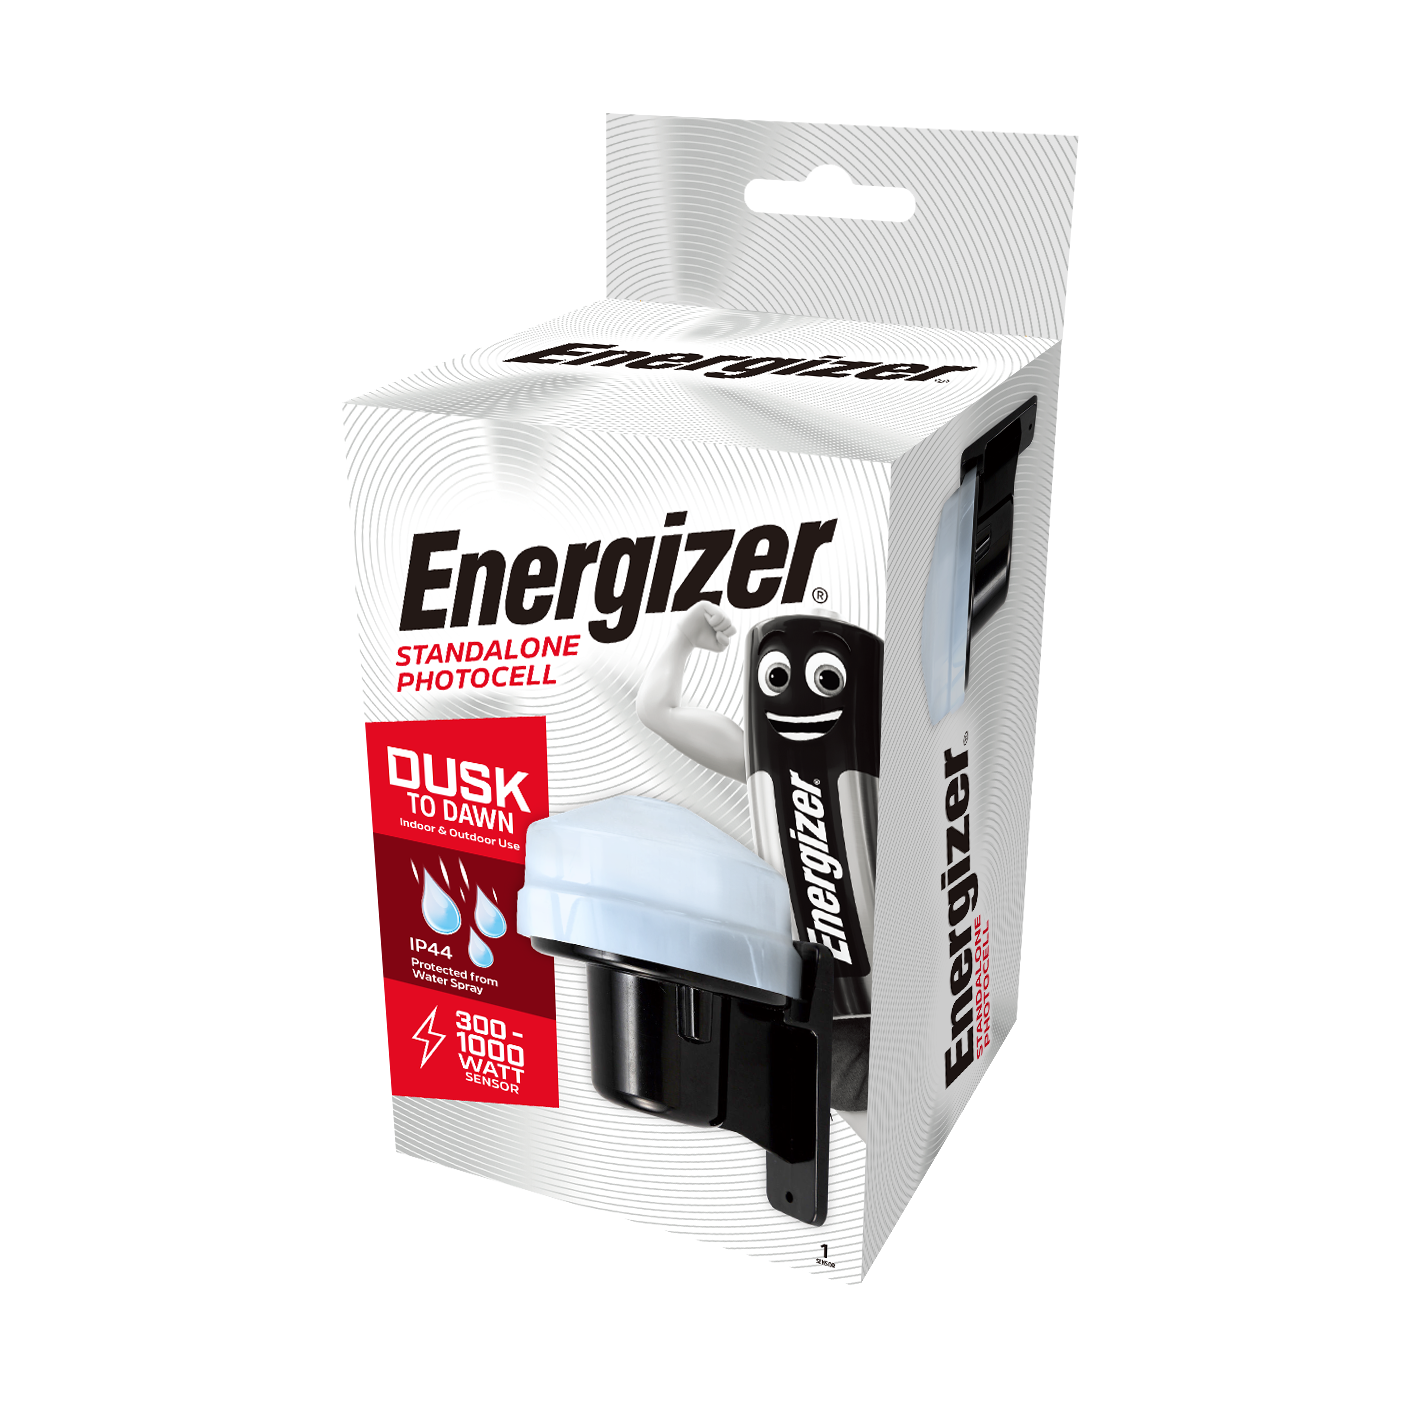 Energizer IP44 Standalone Photocell